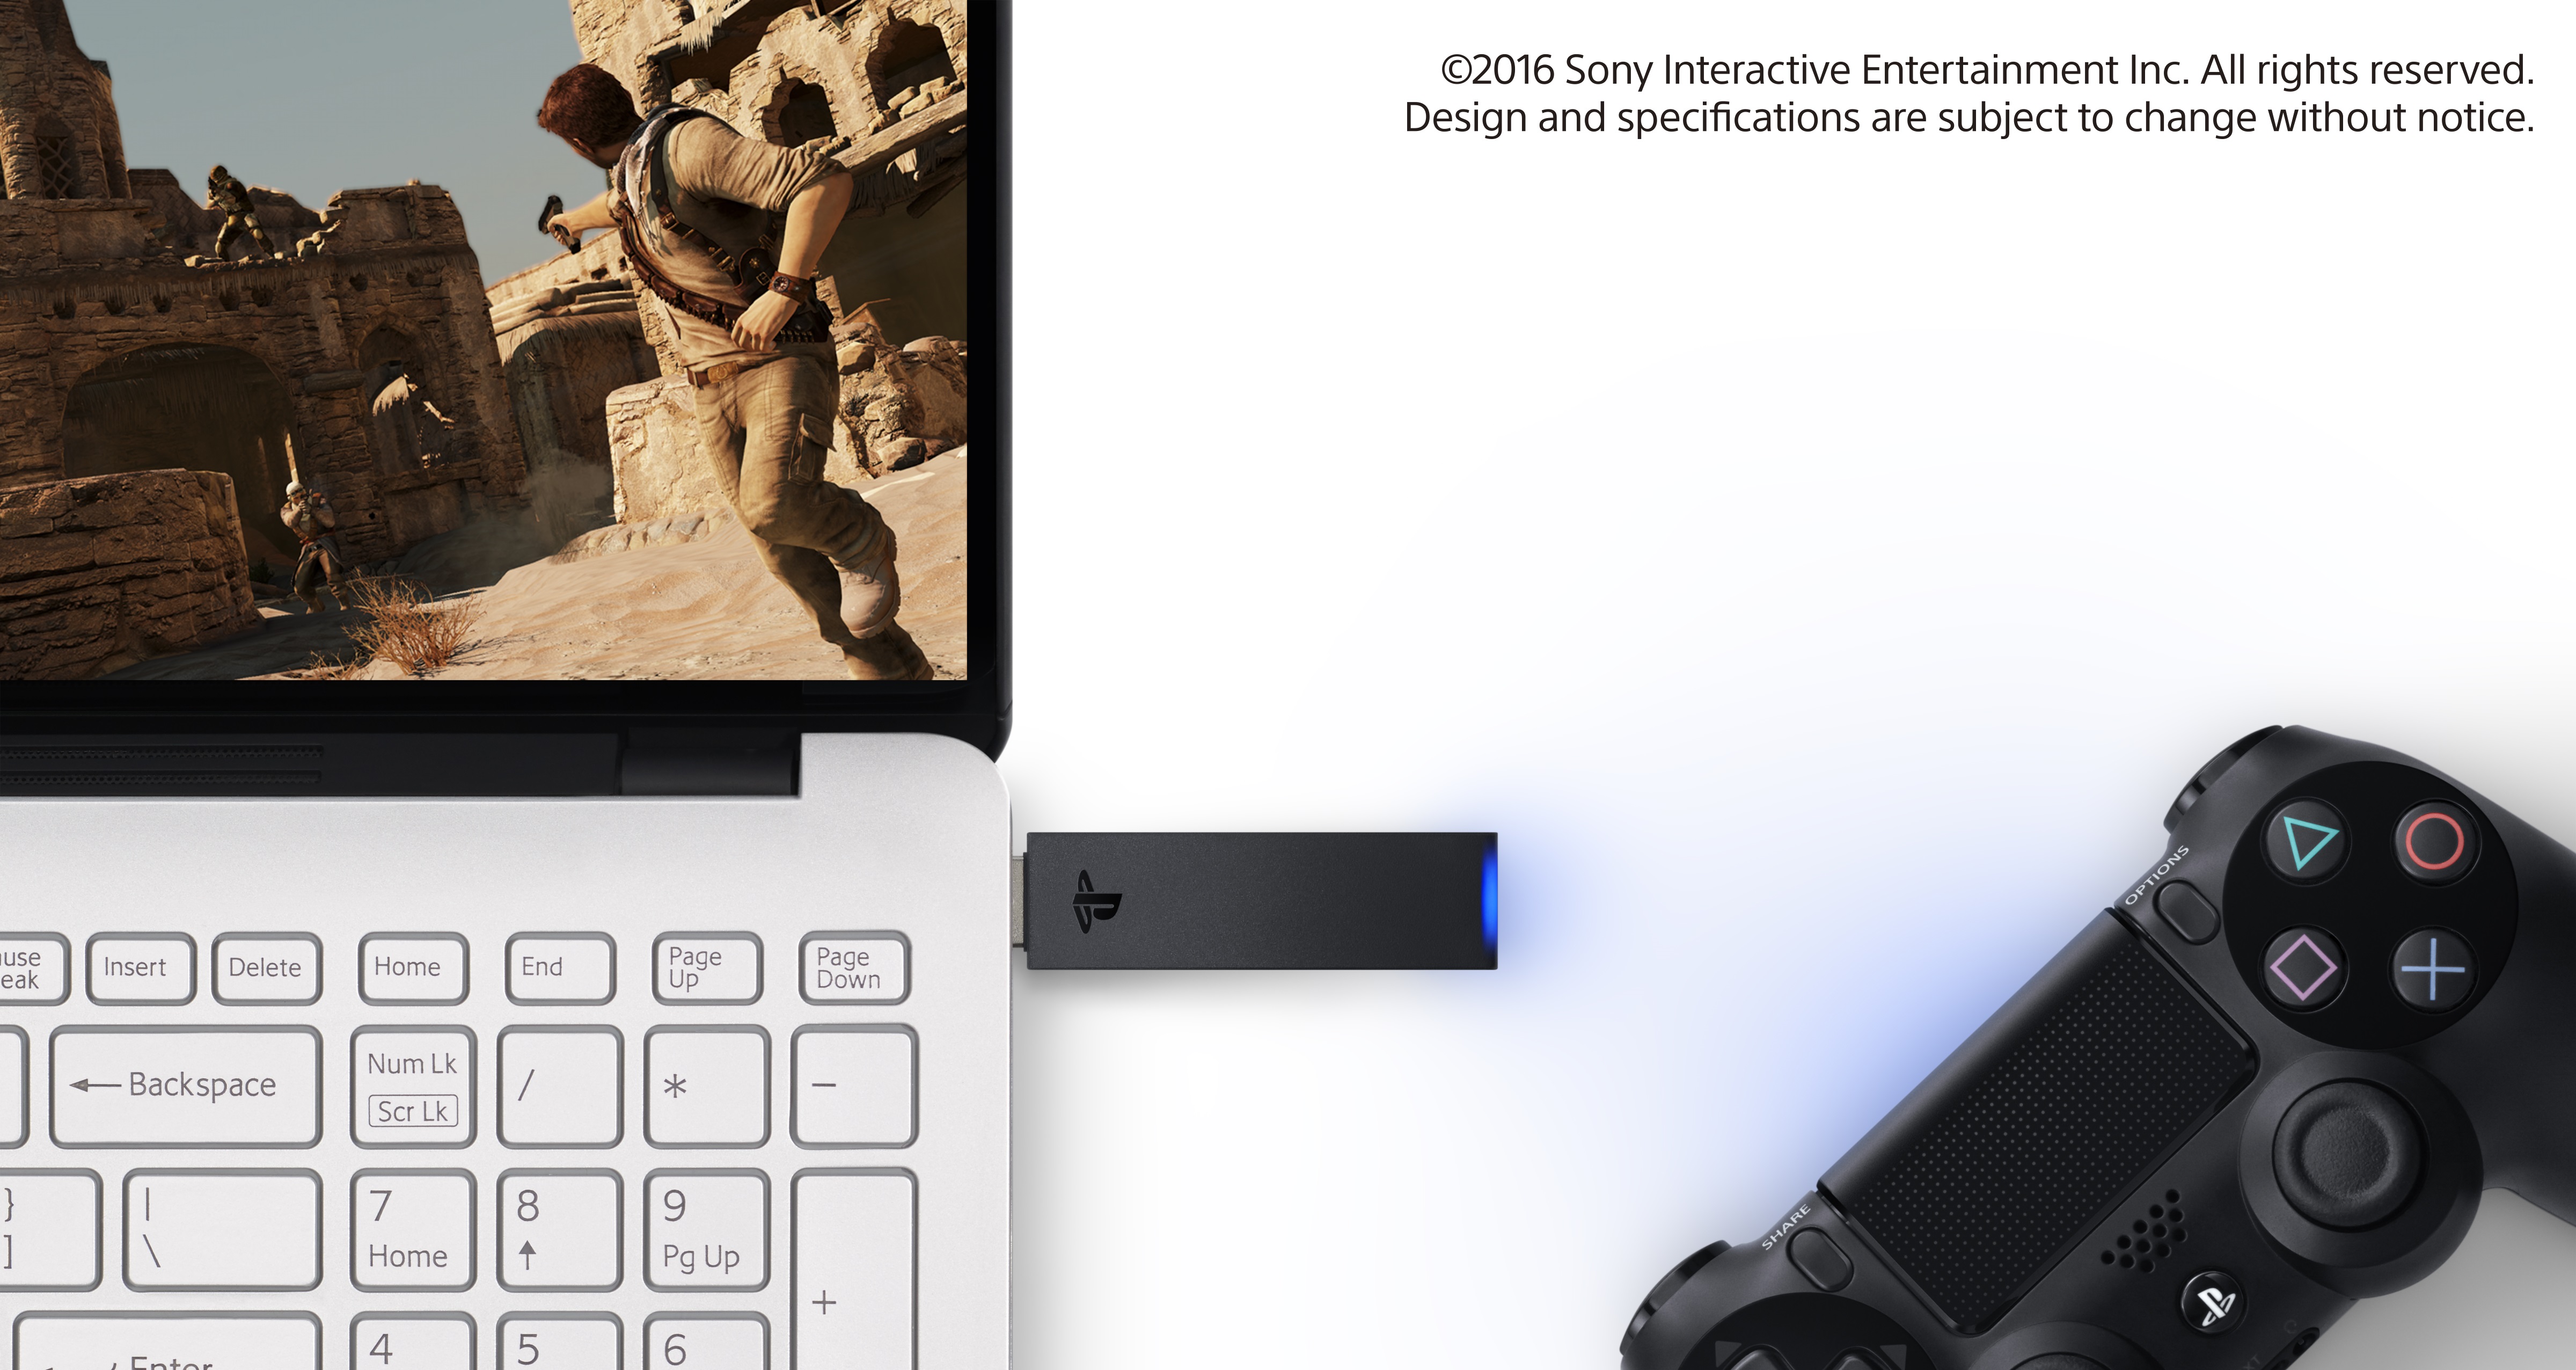 Playstation Now Coming To PC - USB Dualshock 4 Wireless Adapter Also Announced